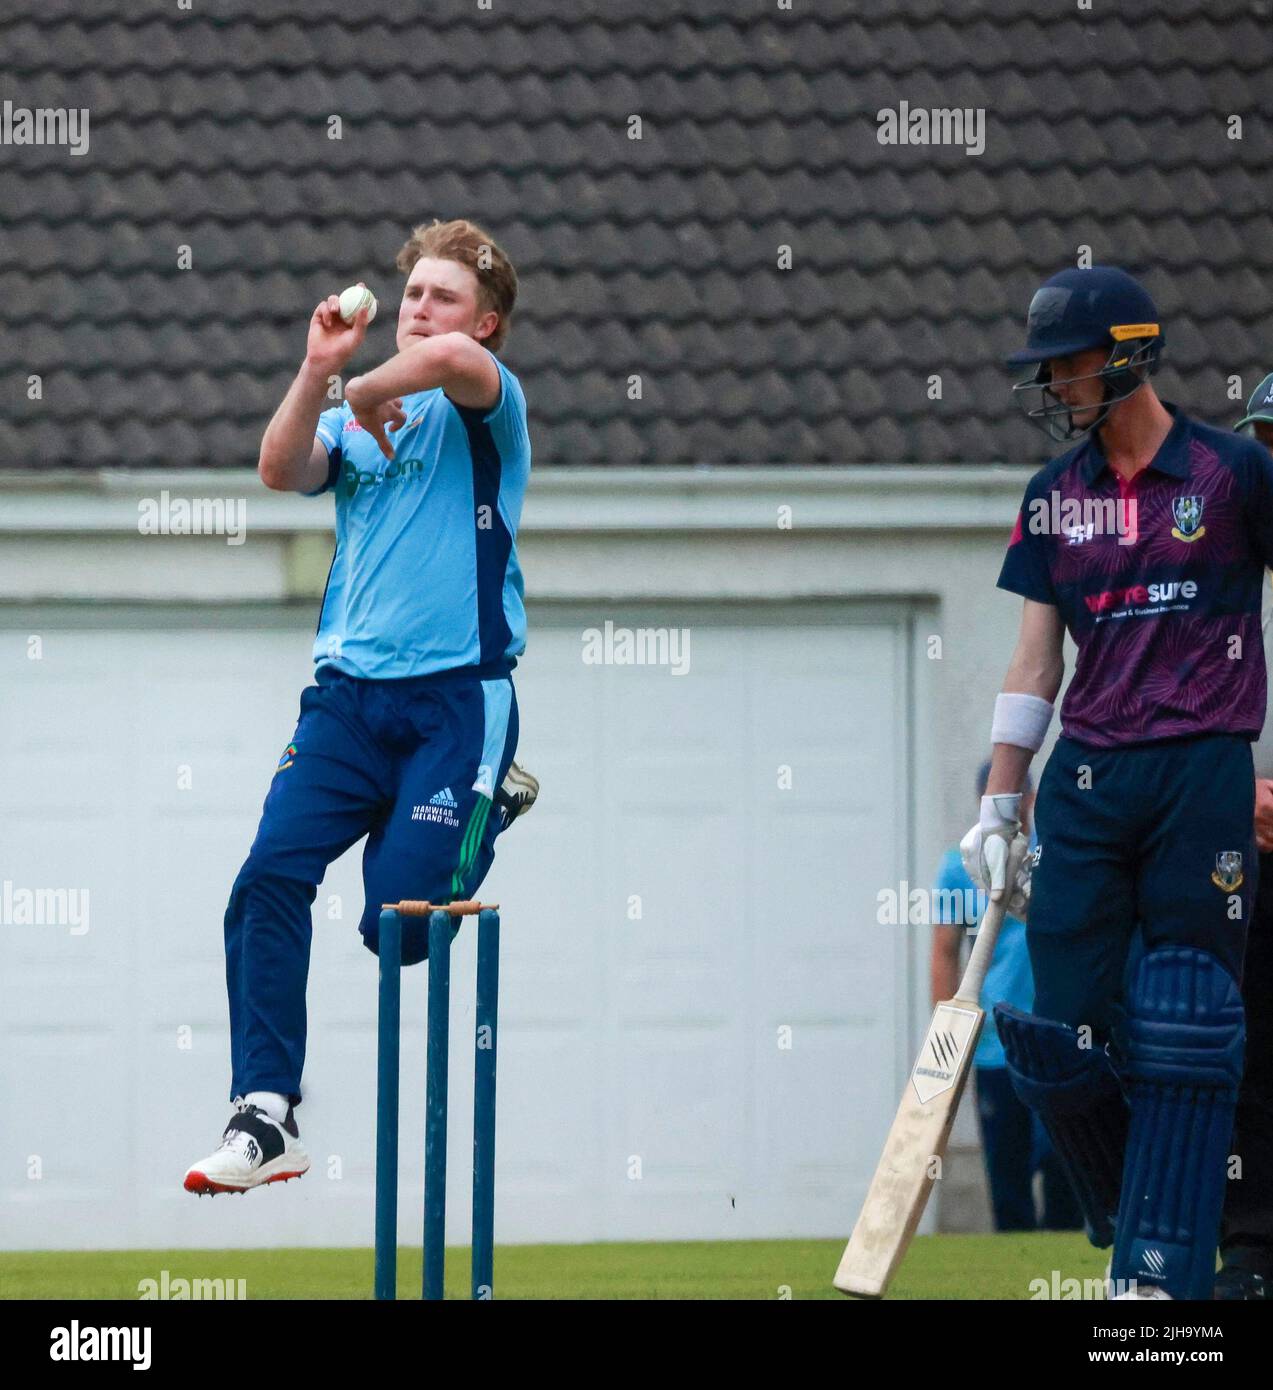 The Lawn, Waringstown, Northern Ireland, UK. 16 Jul 2022. The Lagan Valley Steels Twenty 20 Cup Final 2022. CIYMS v CSNI – CIYMS won by 16 runs (DLS) in a rain-affected match. CSNI bowler in action. Credit: David Hunter/Alamy Live News. Stock Photo